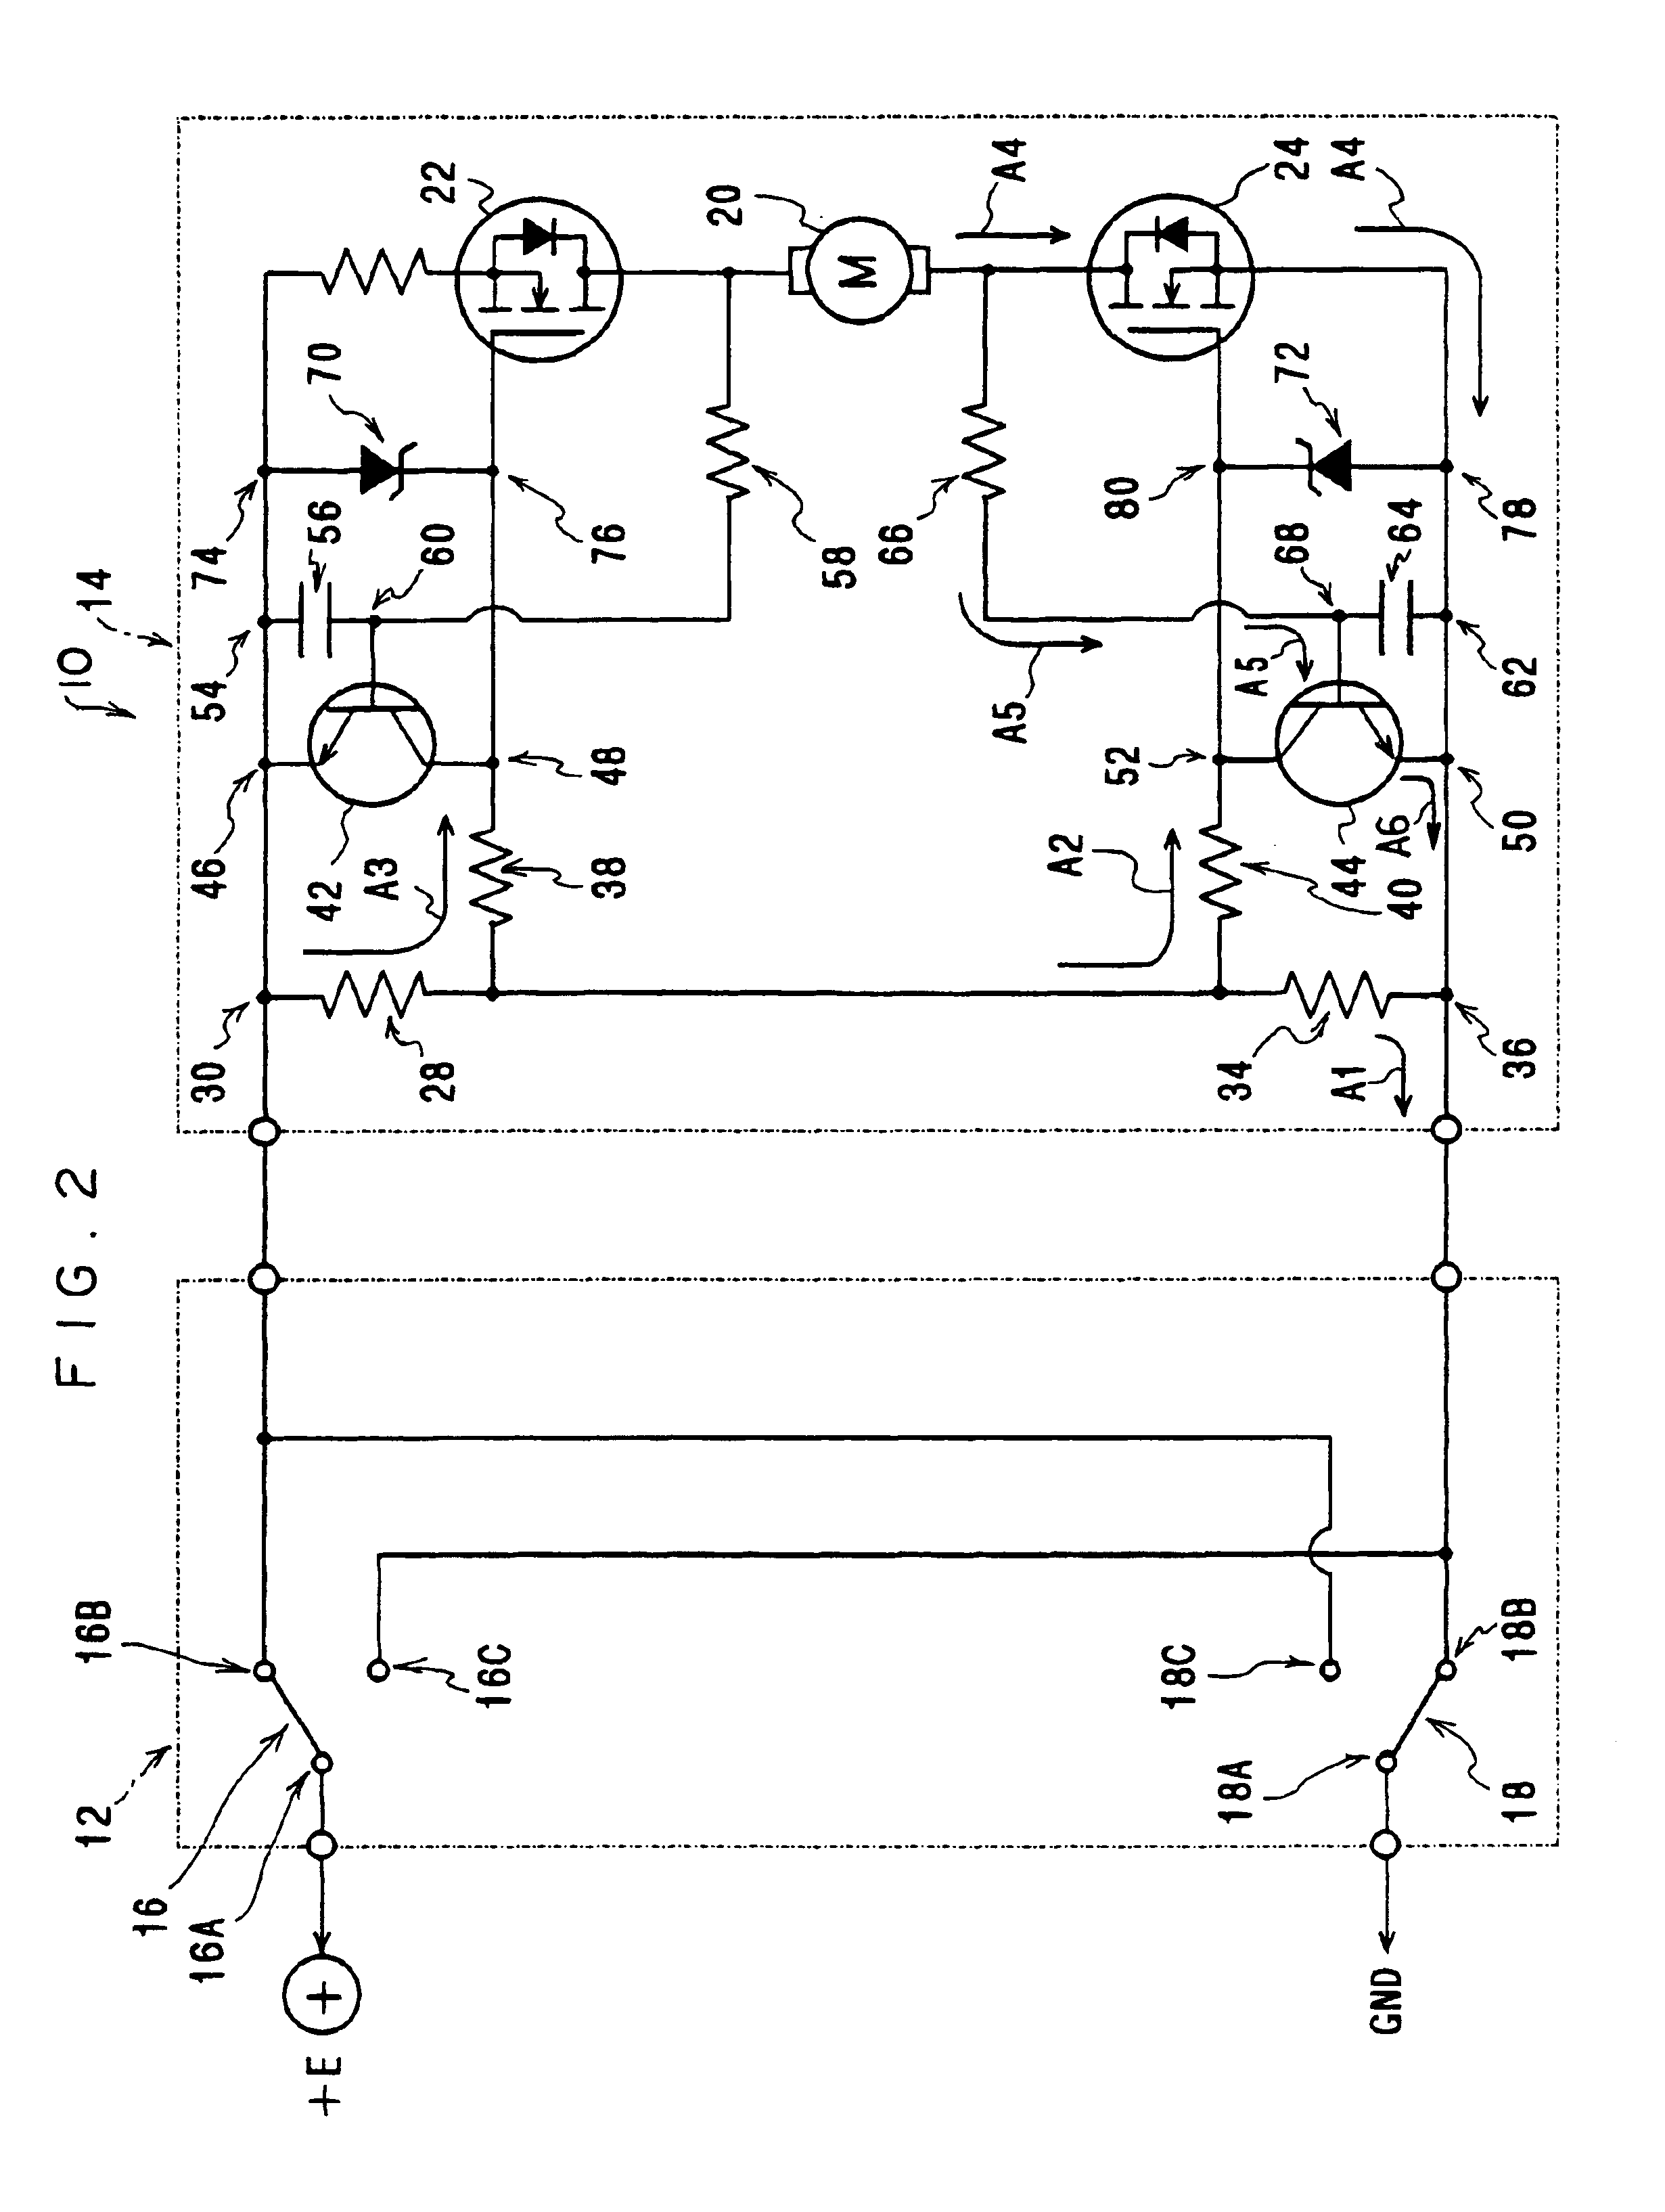 Motor control circuit for mirror device